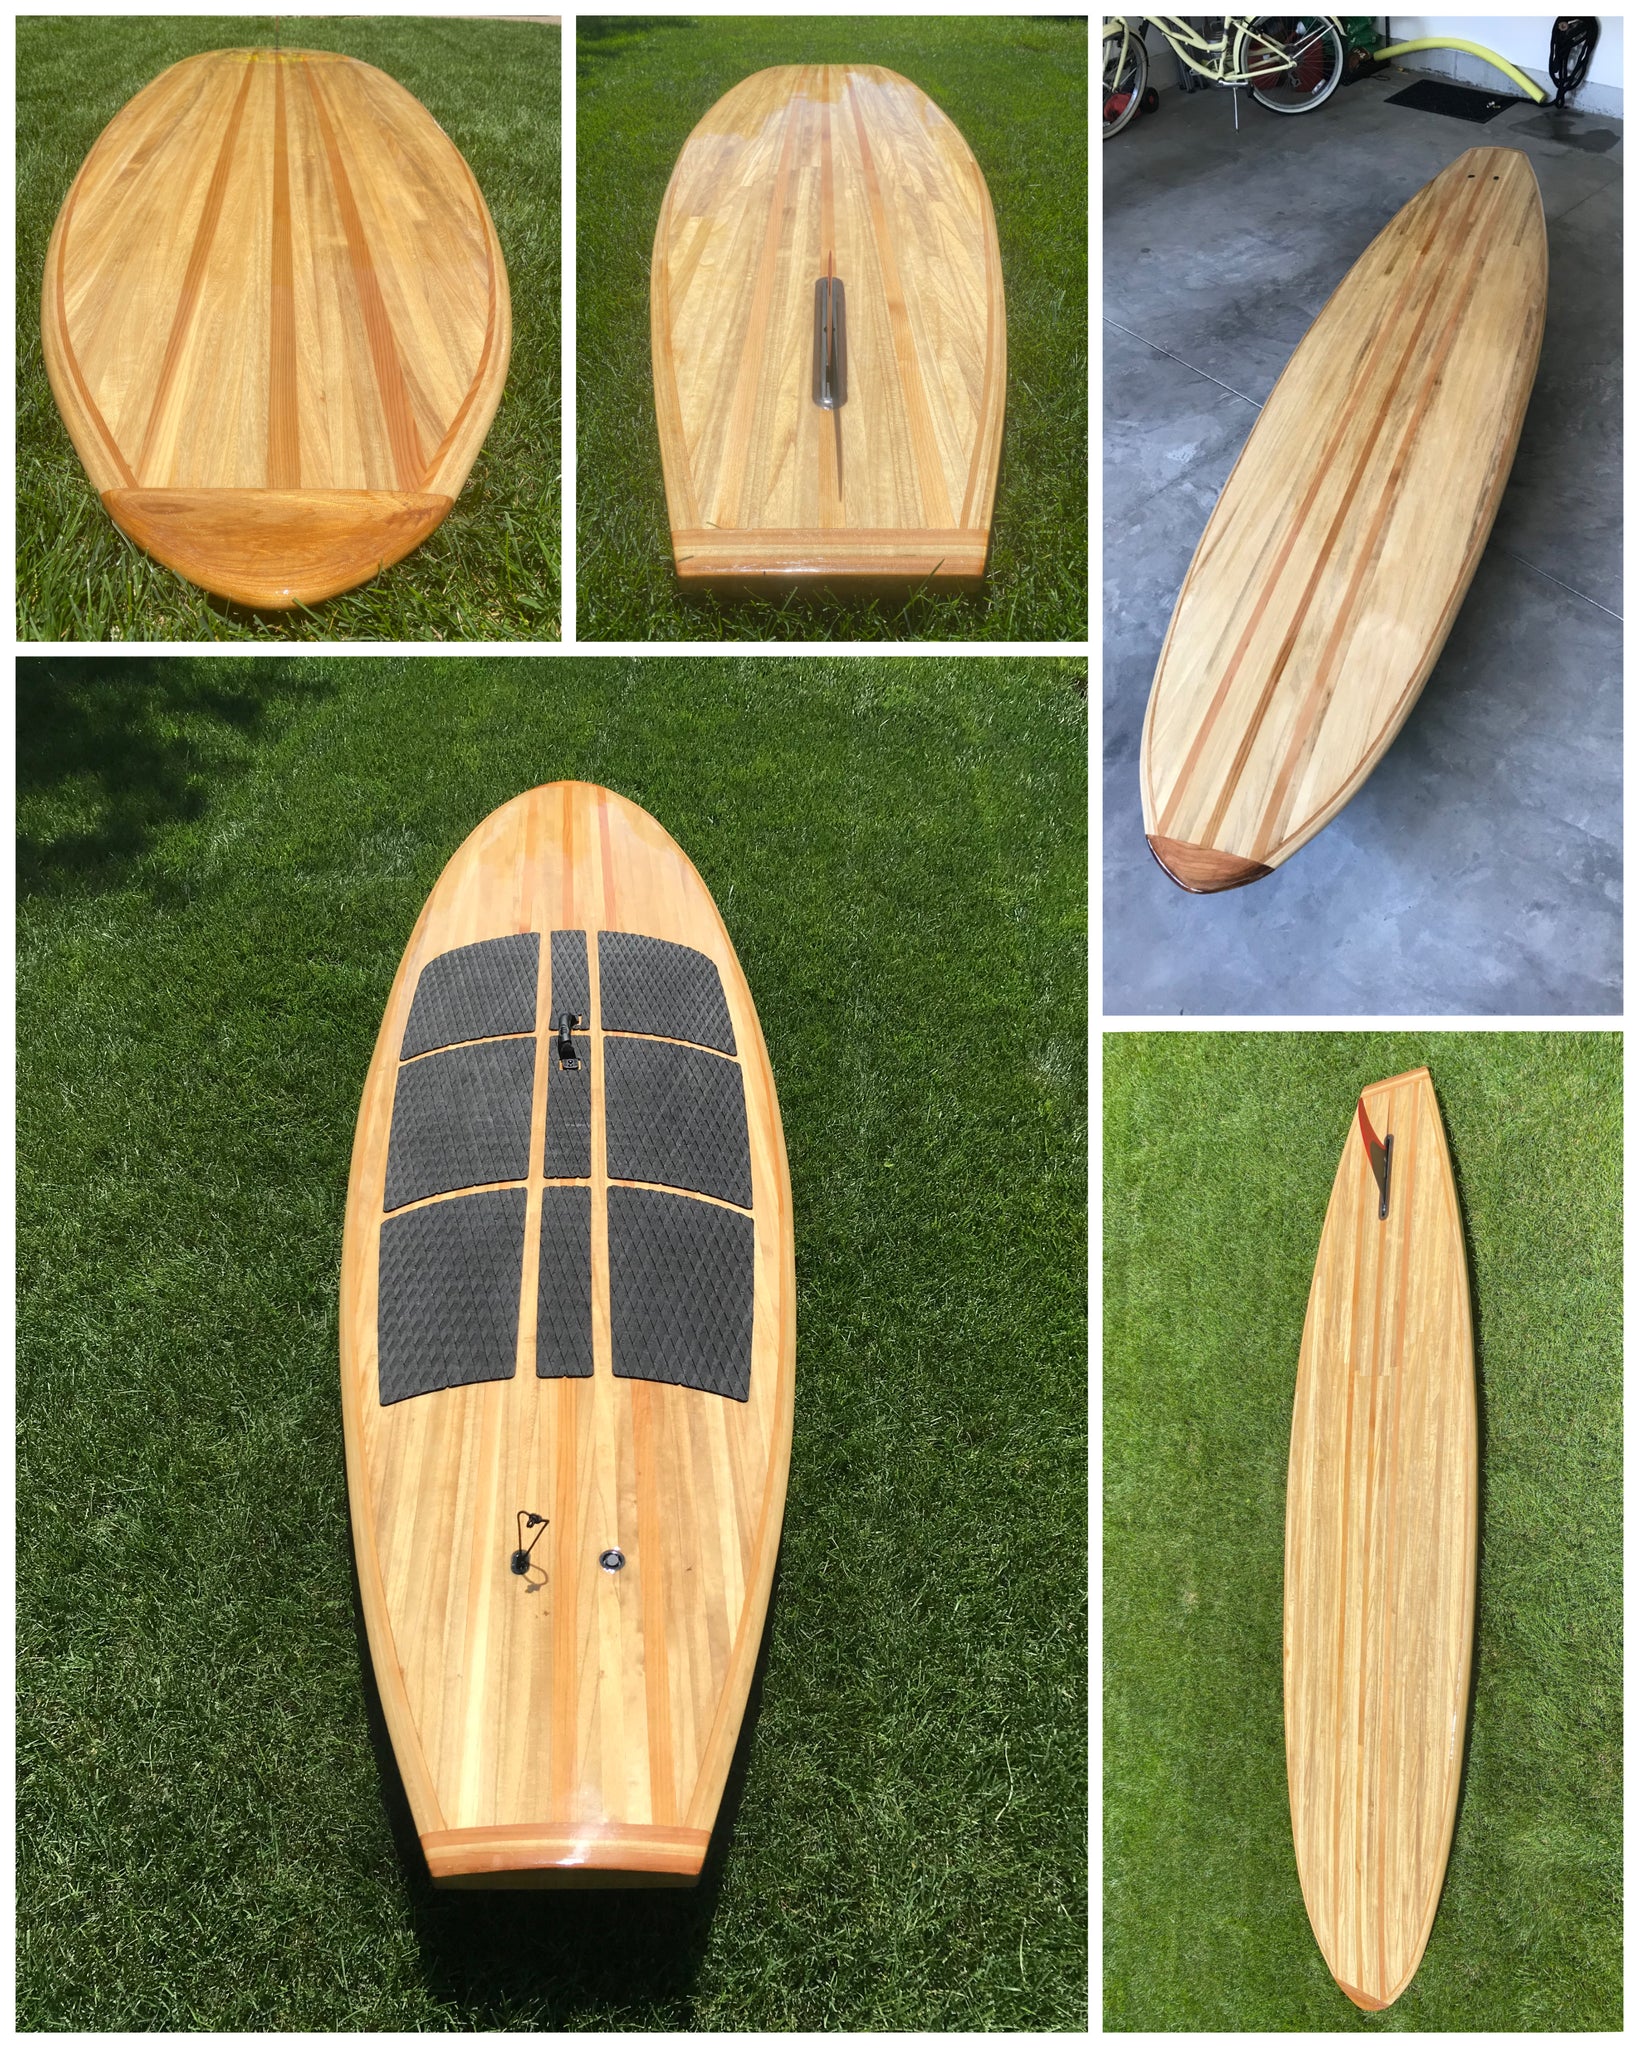 Jarvis Boards San Marcos 11'4" paddle board plan